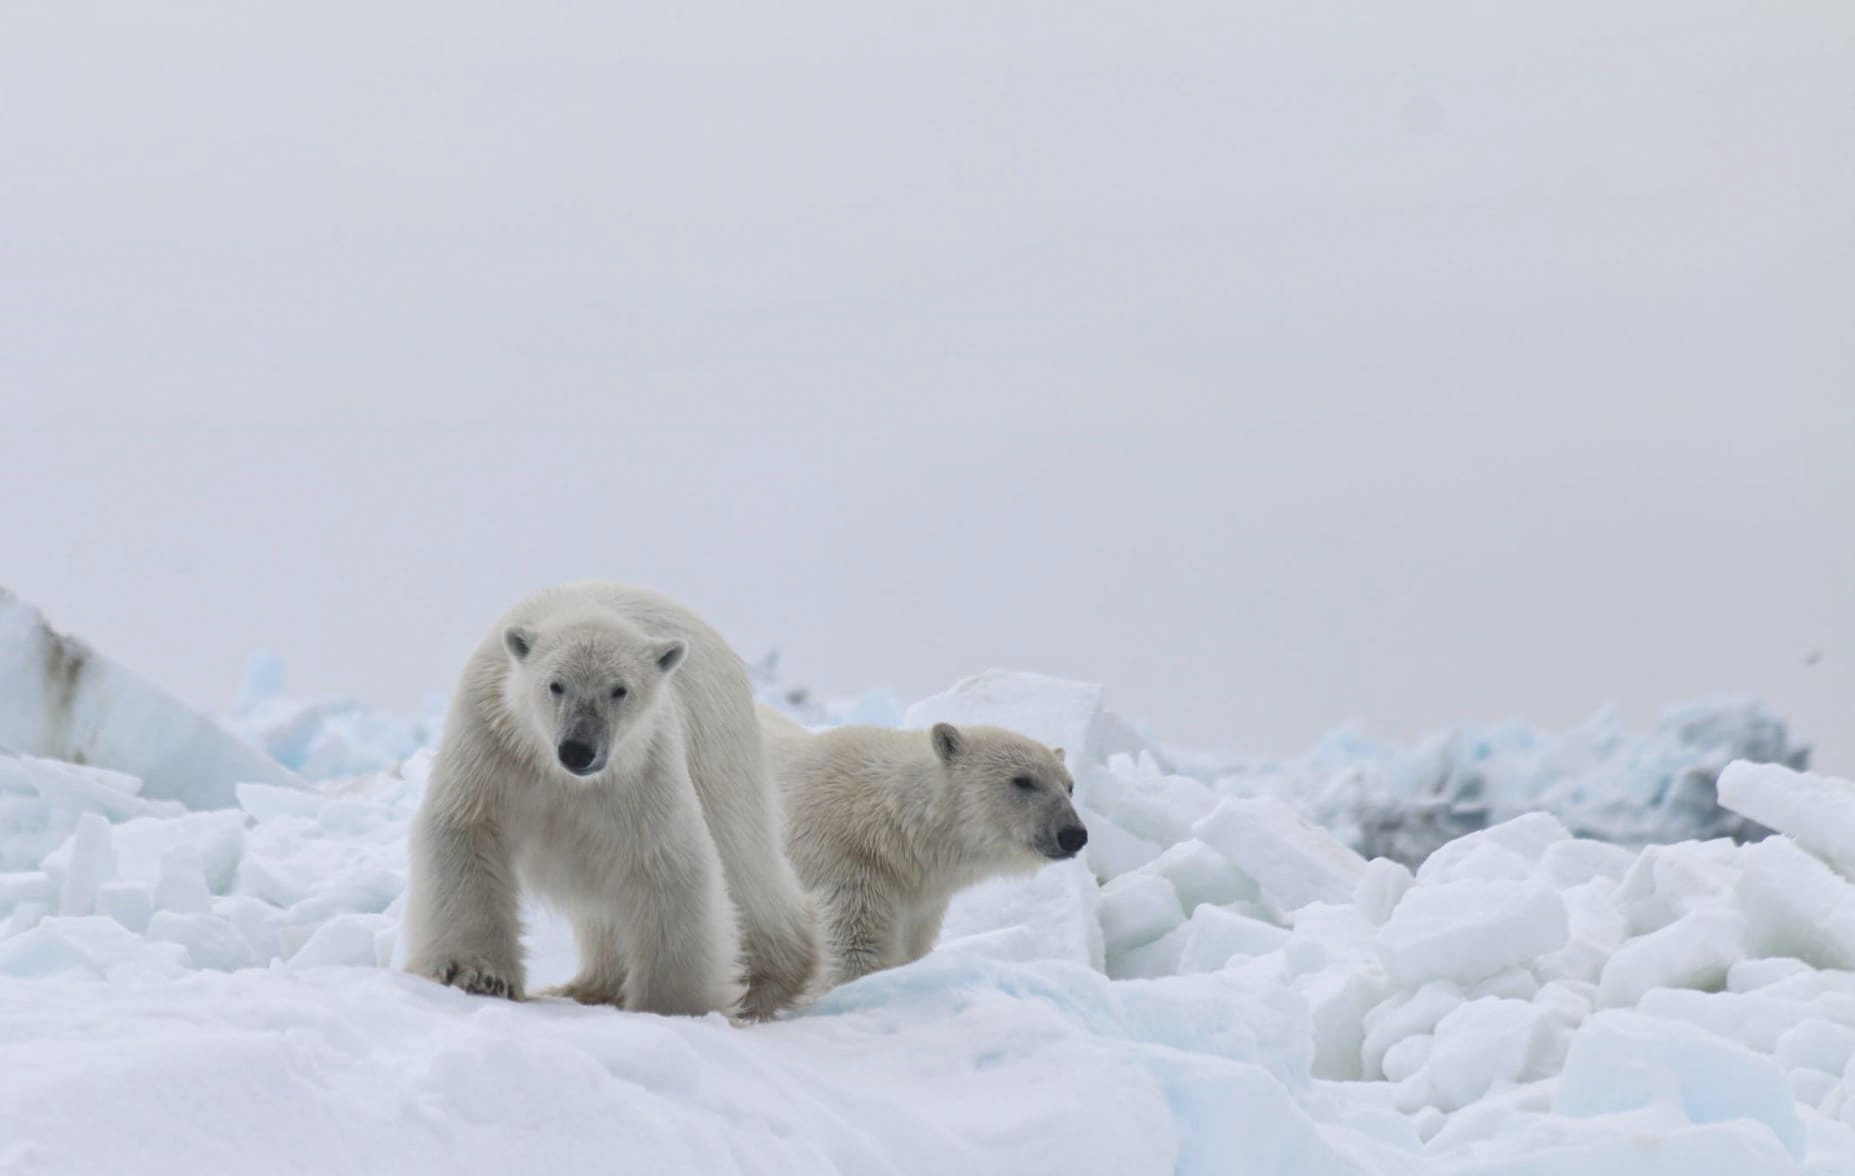 Two polar bears walk in jumbled ice and snow.